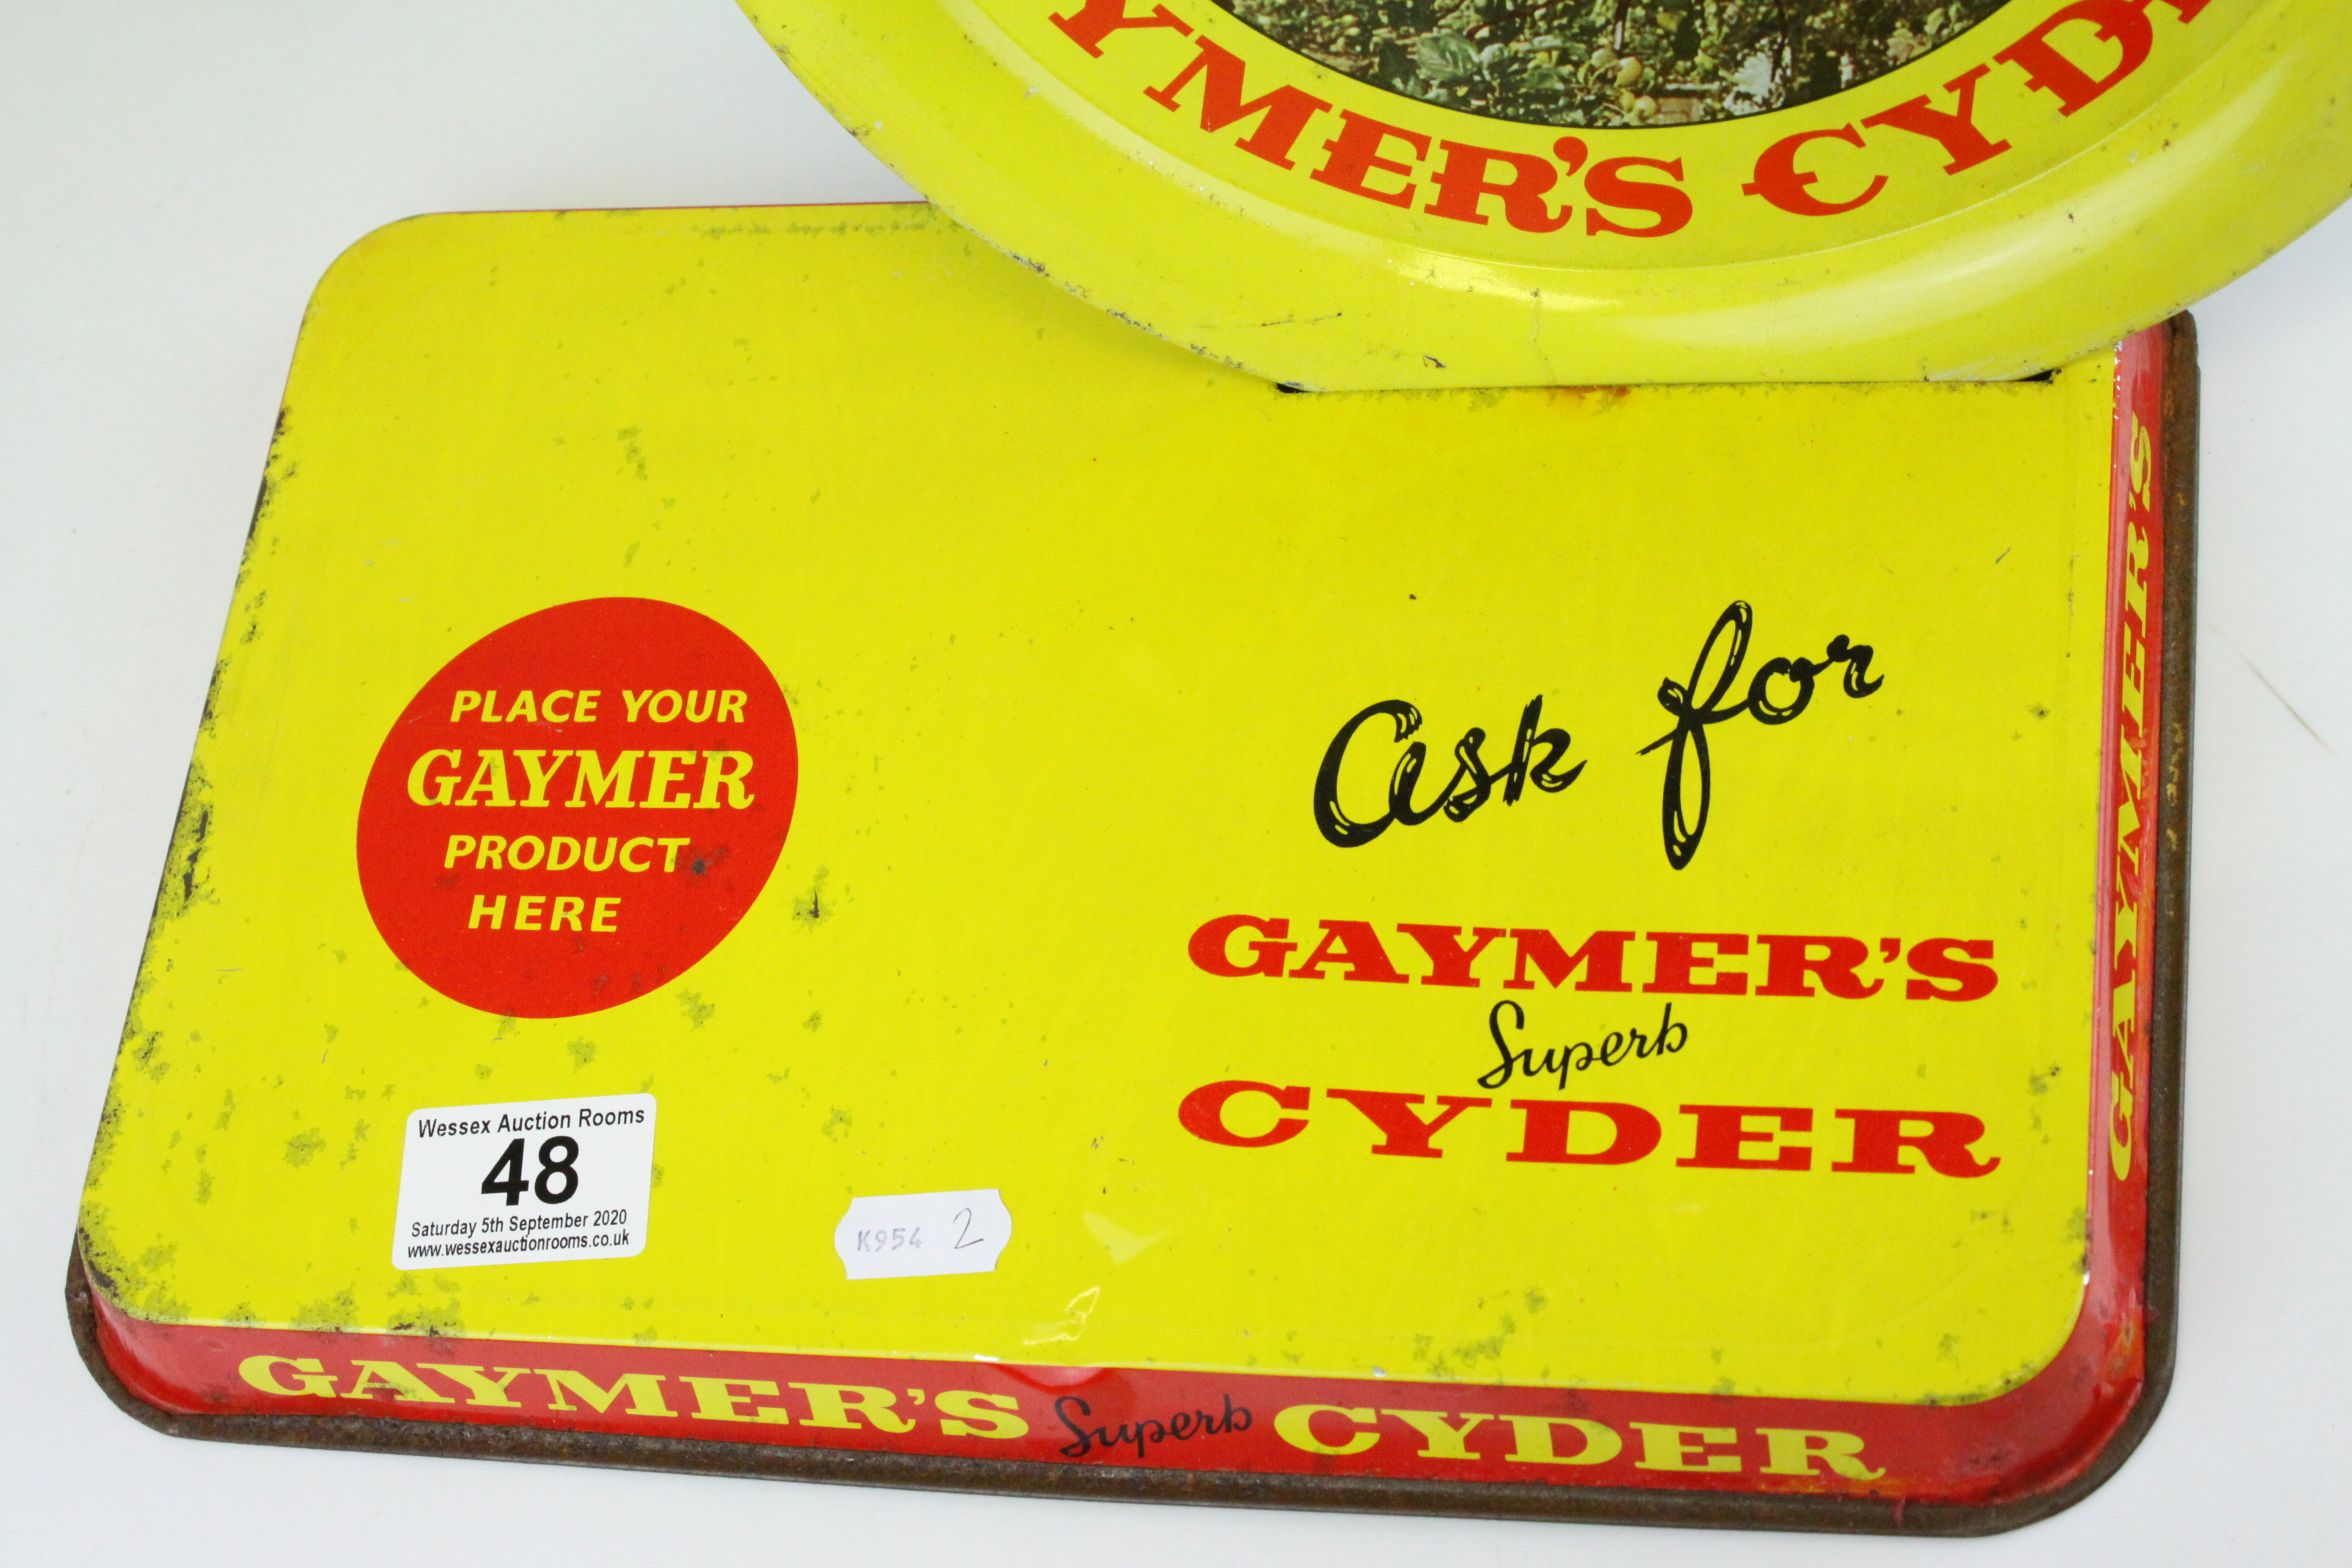 Retro / Vintage Advertising Pub Tray which inserts into a Stand for placing a Glass ' Go Gay with - Image 4 of 4